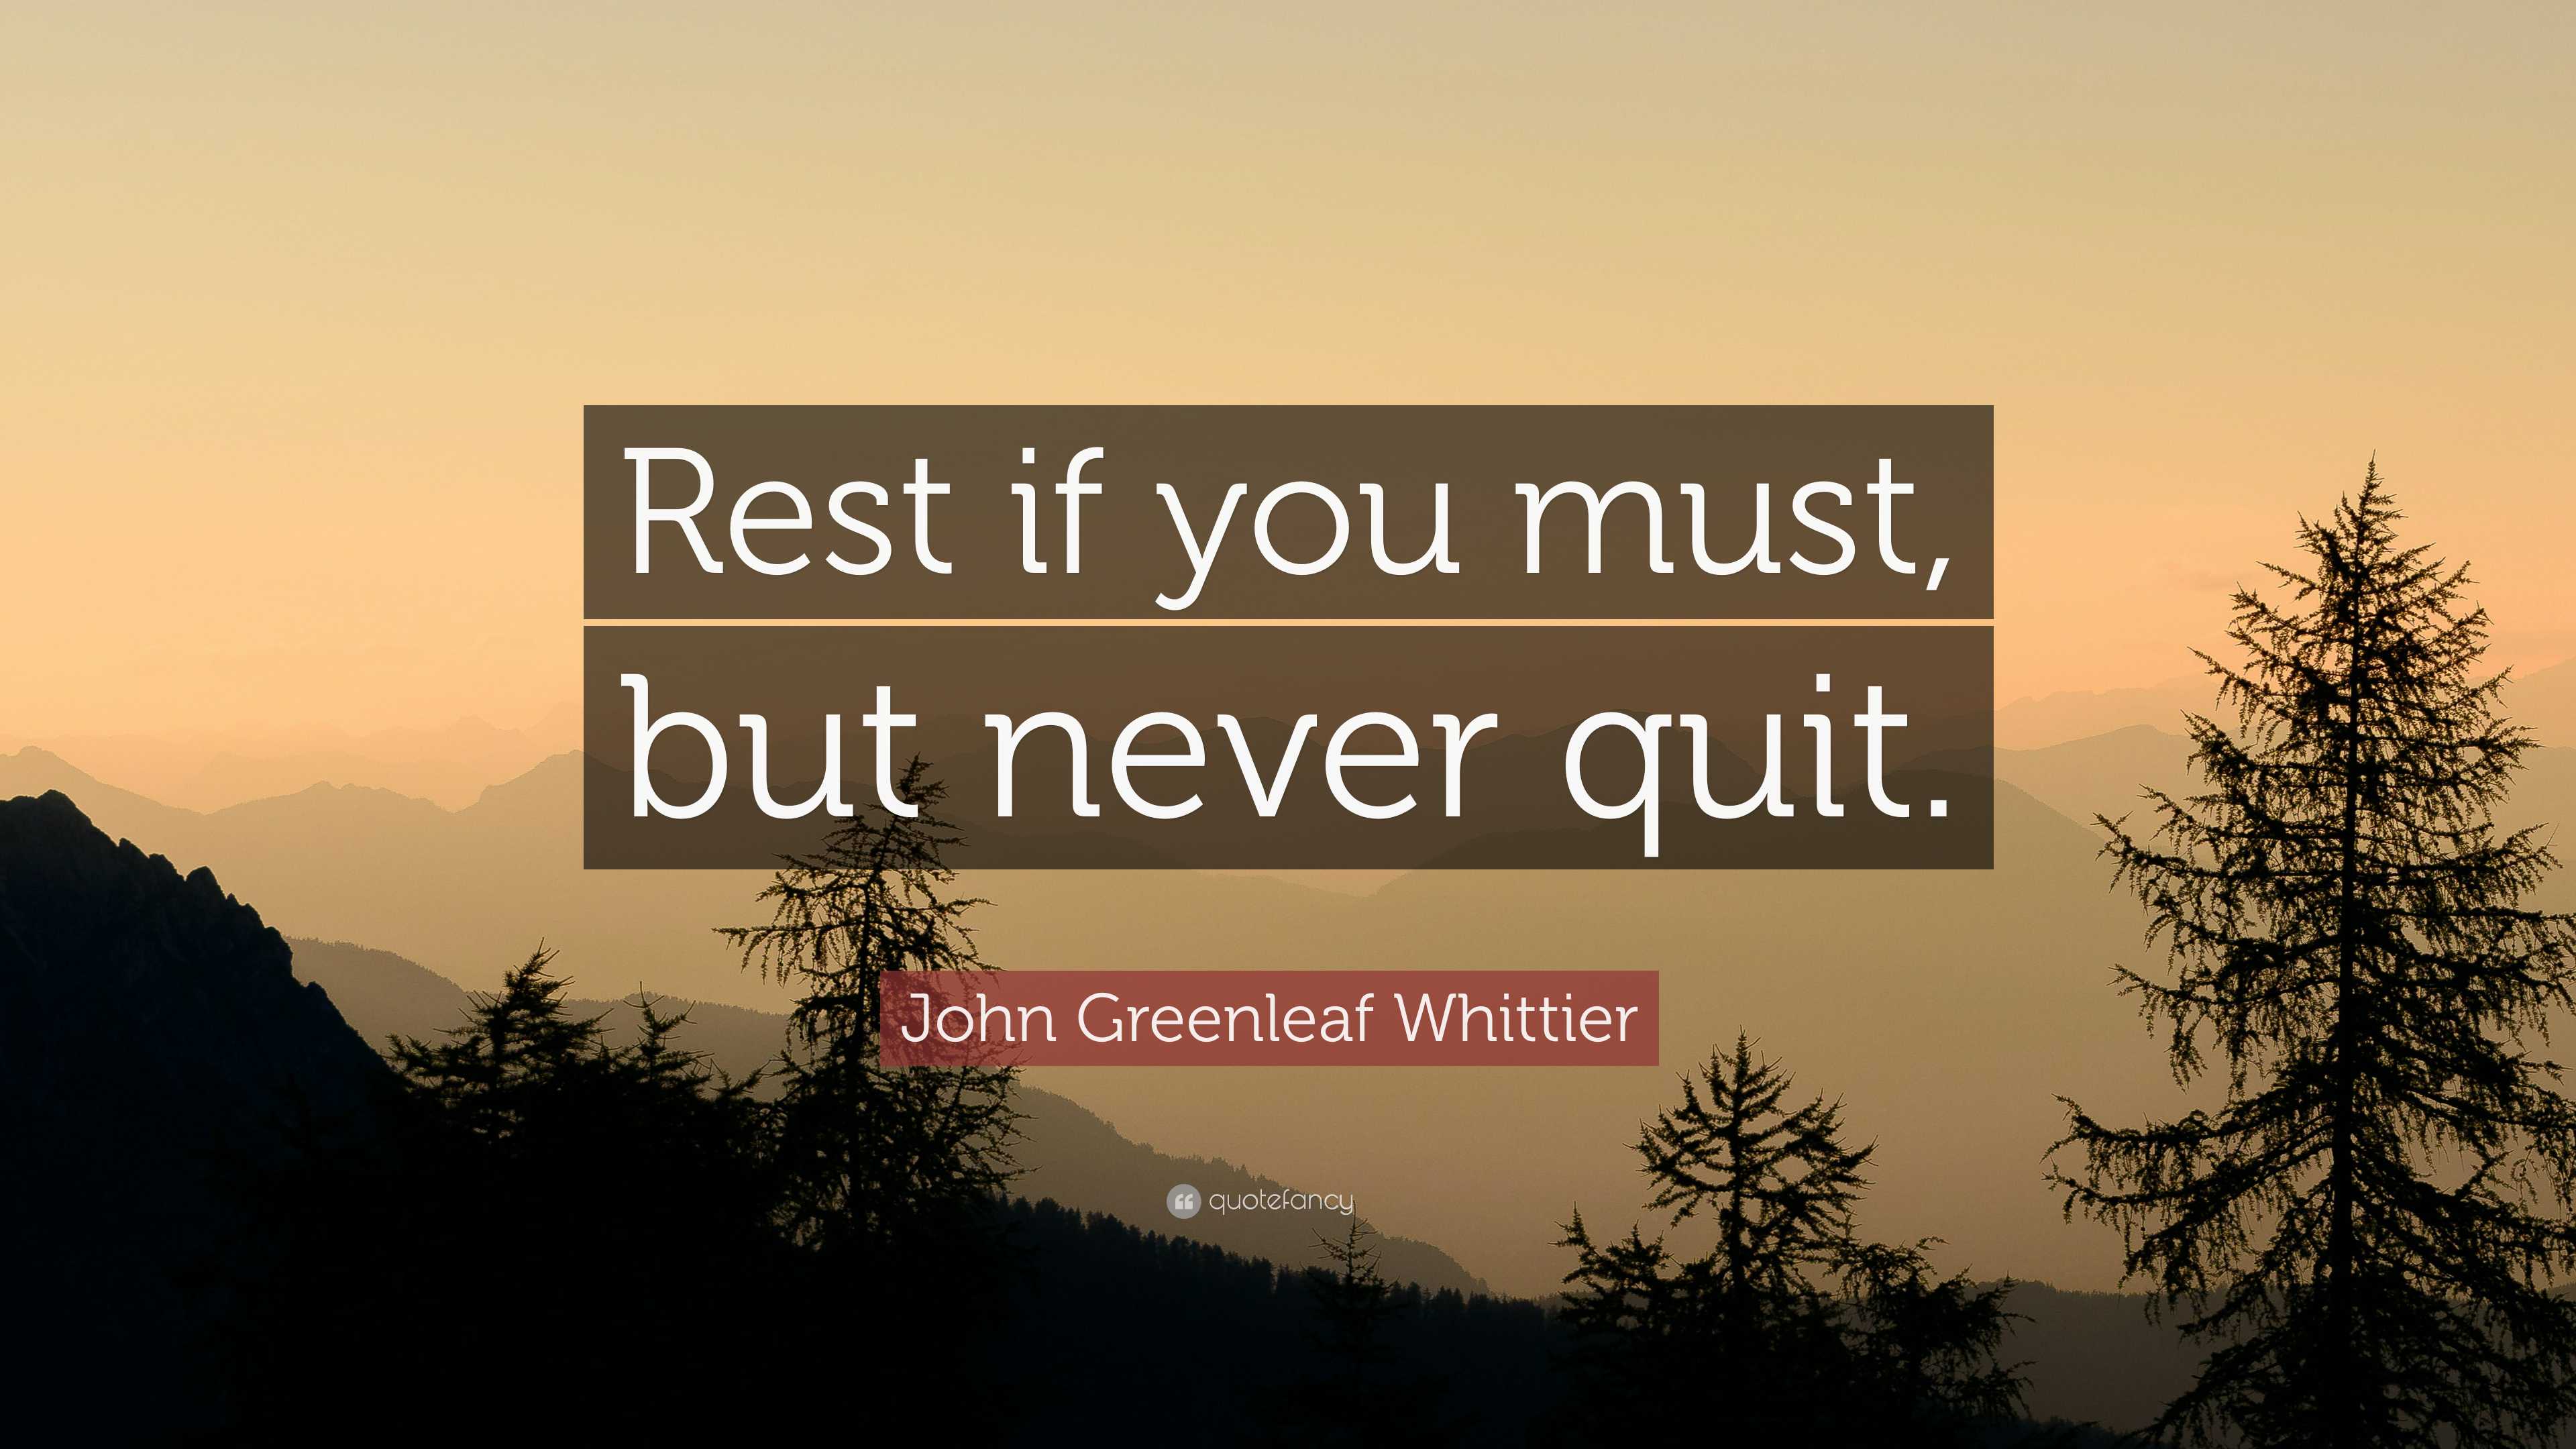 John Greenleaf Whittier Quote: “Rest if you must, but never quit.”